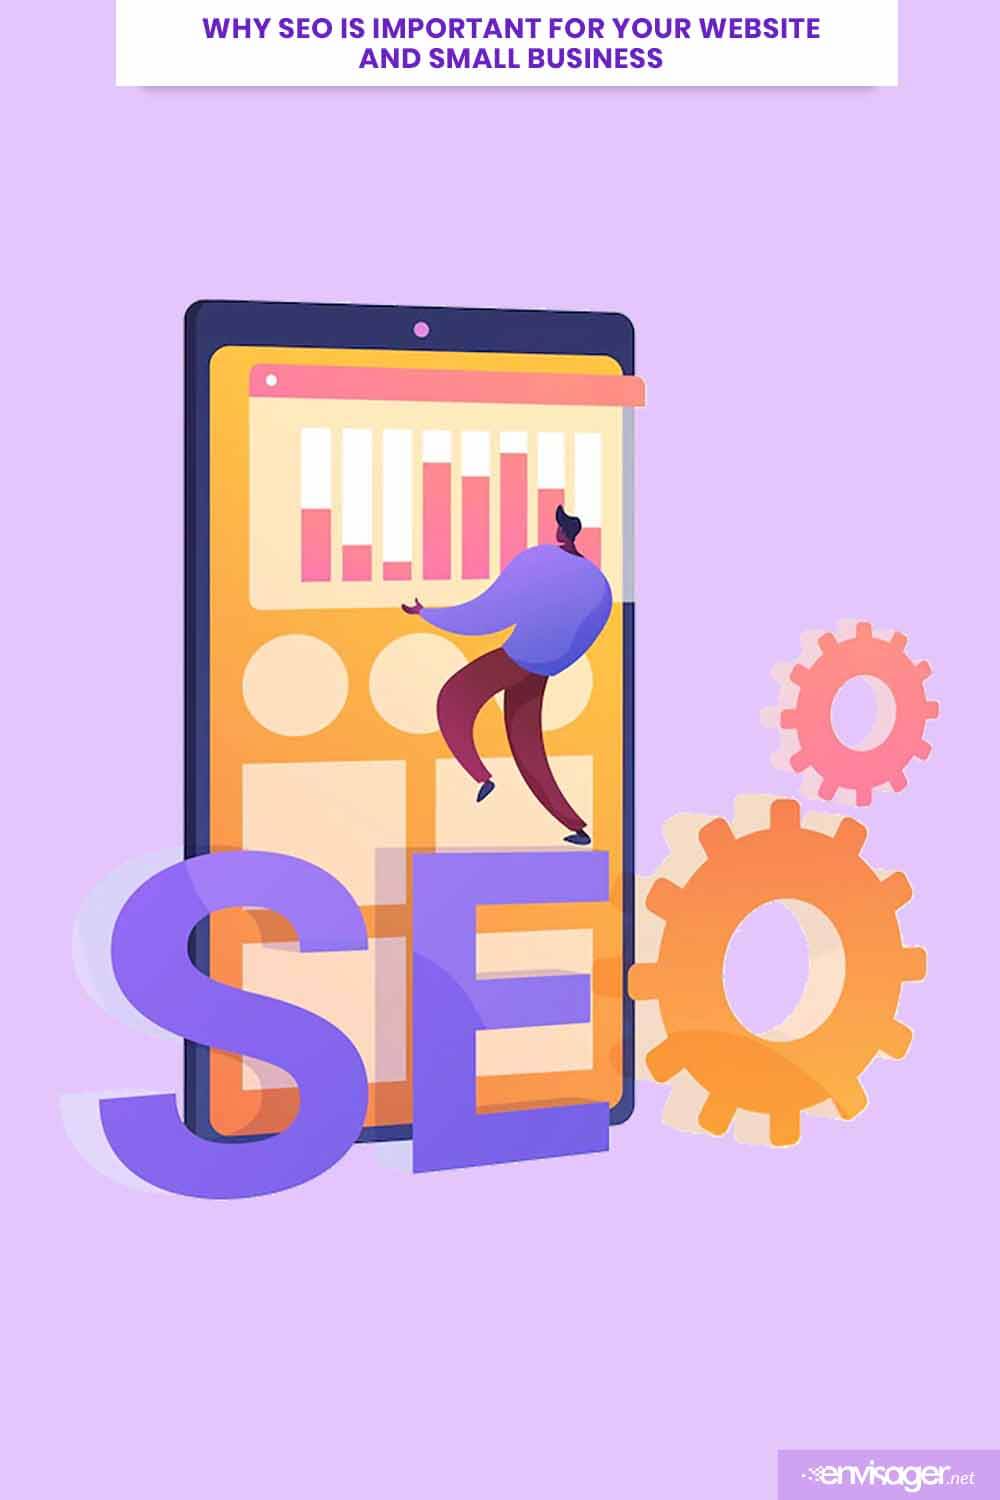 Why SEO Is Important For Your Website and Small Business